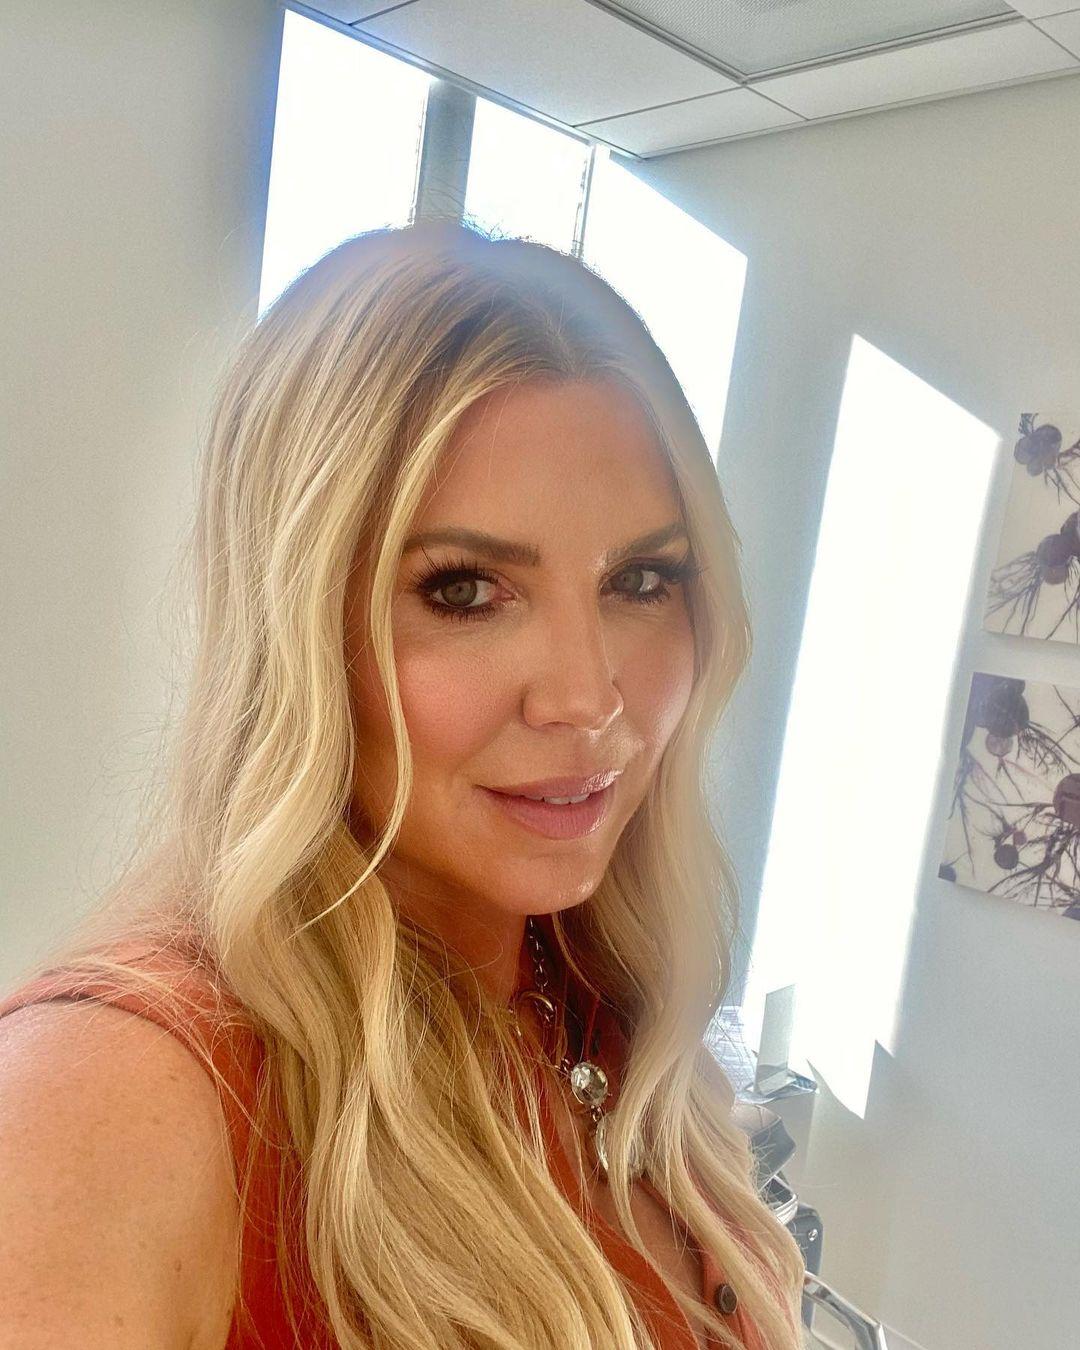 'RHOC' Dr. Jen Armstrong Accused Of Unsanitary Practices & Use Of Illegal Substances